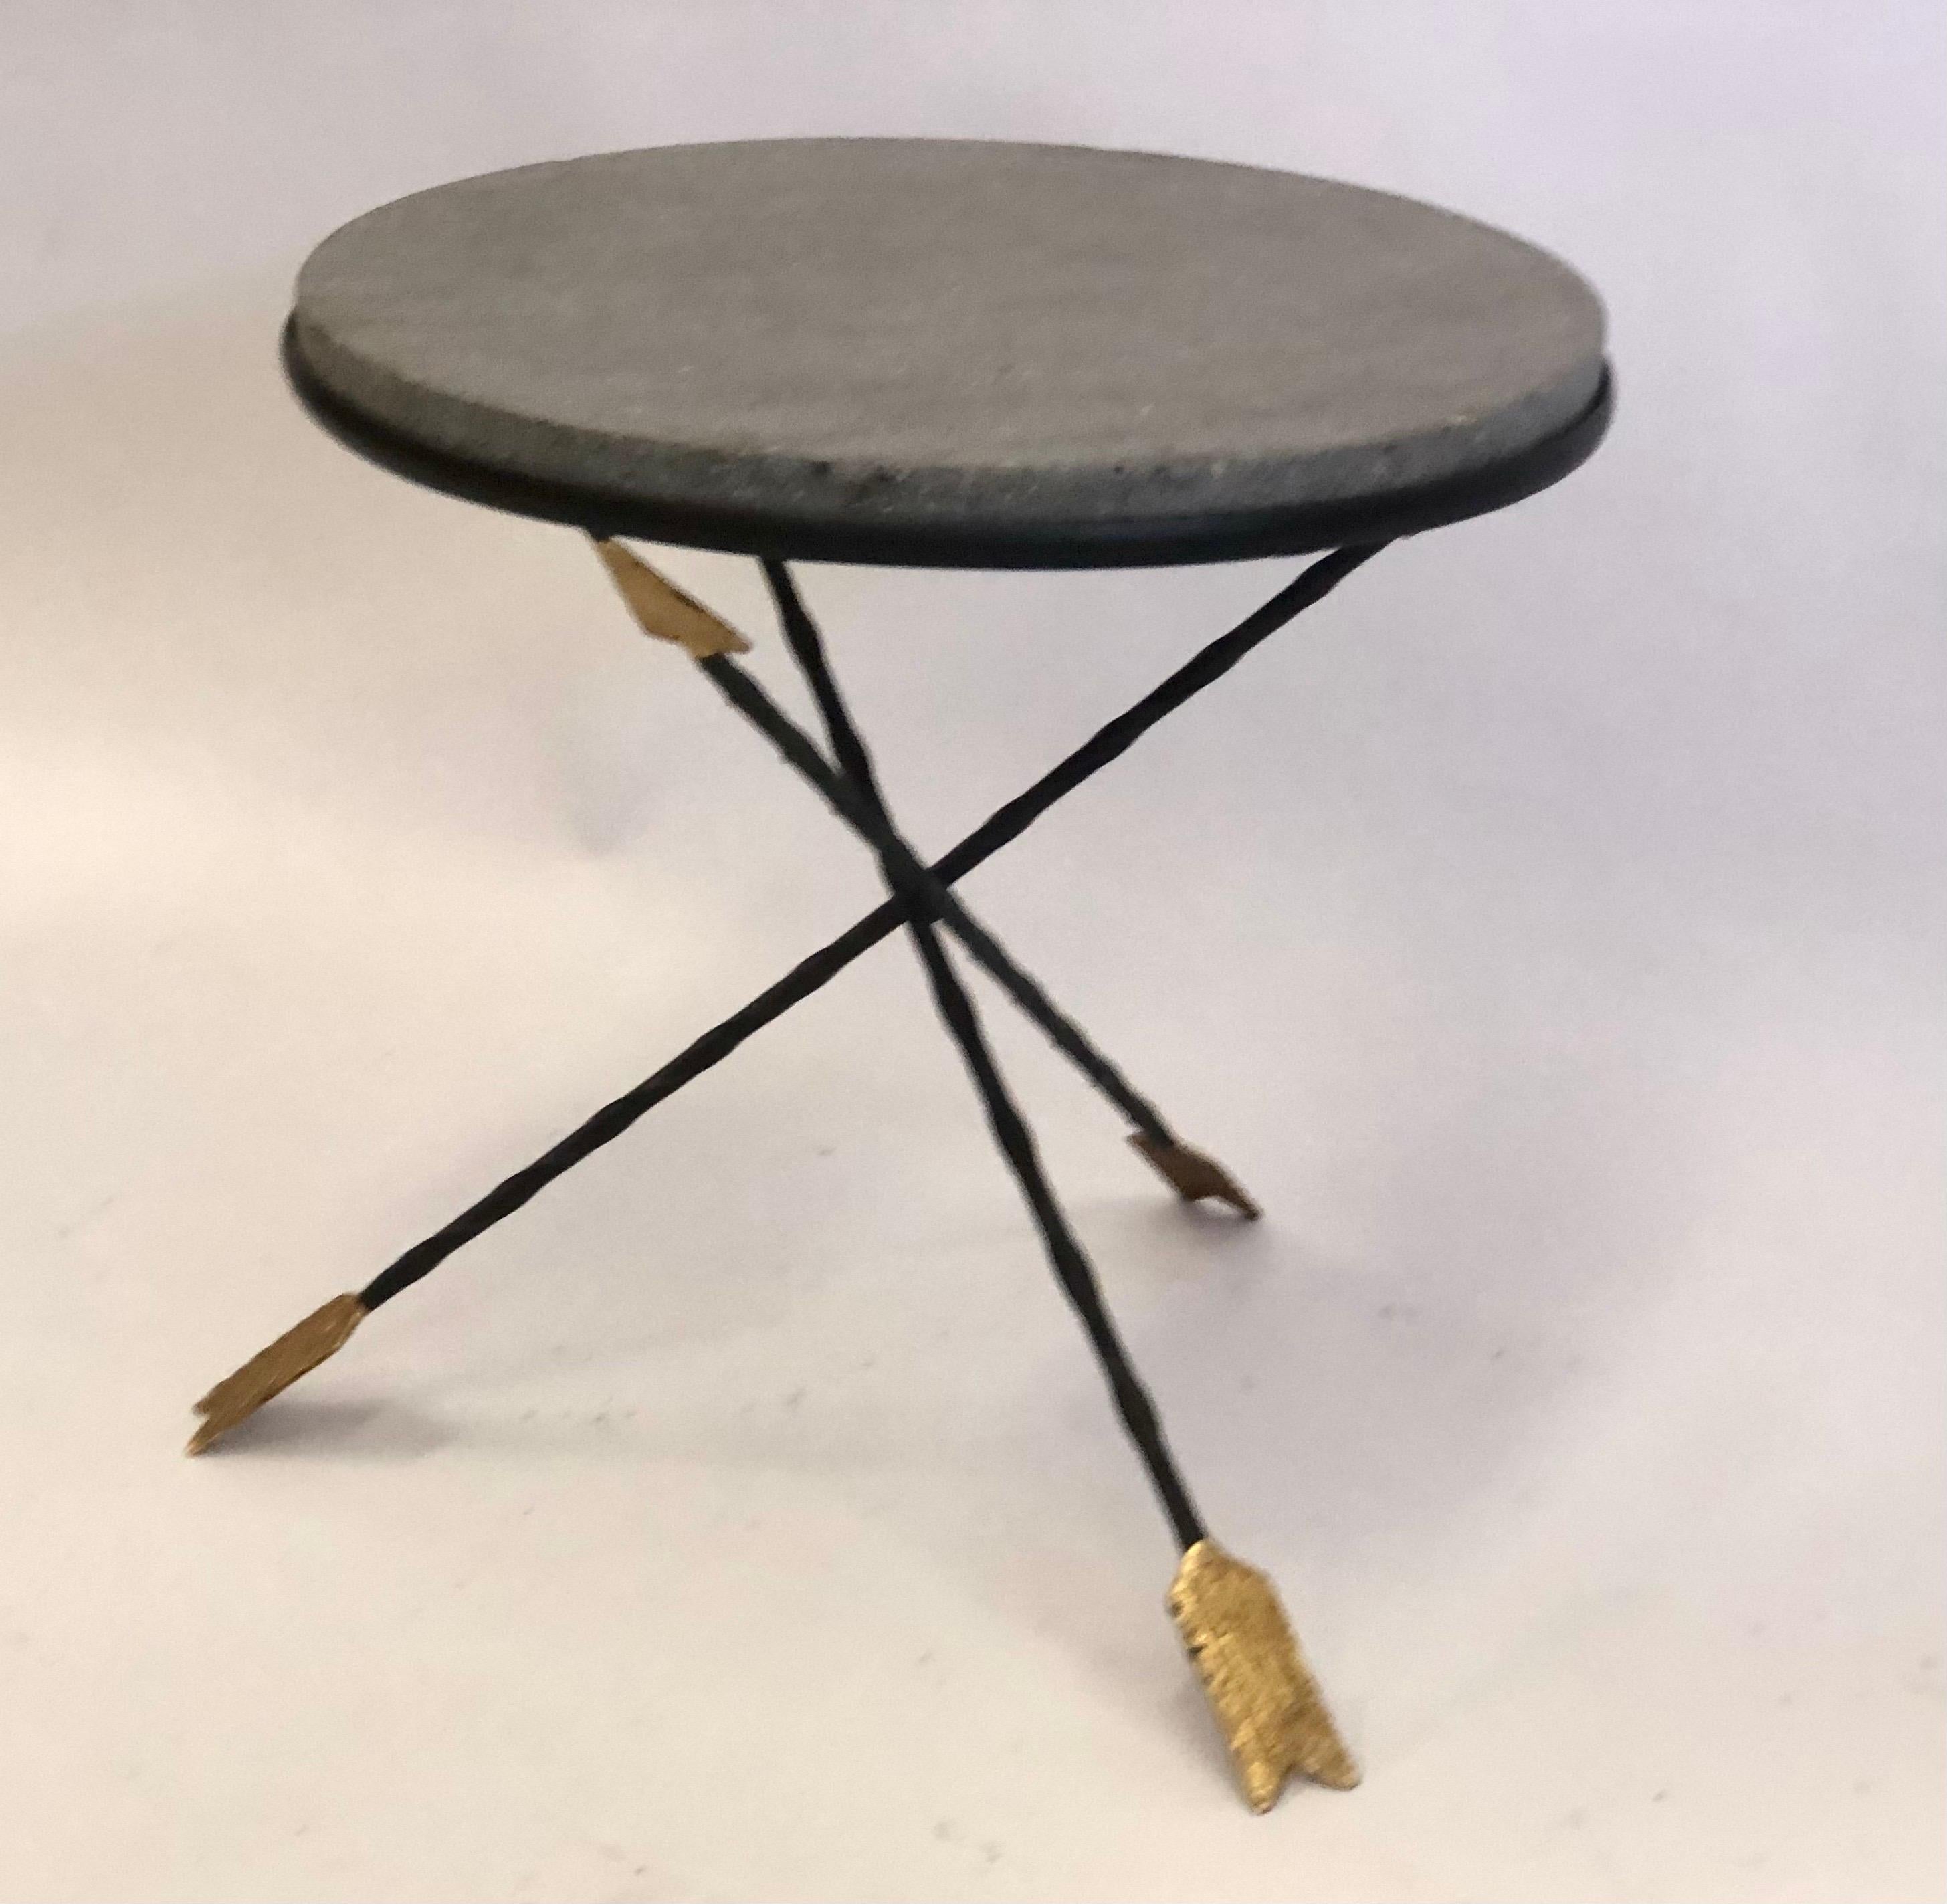 20th Century French Modern Neoclassical Gilt Iron & Basalt Stone Side Table by Maison Jansen For Sale